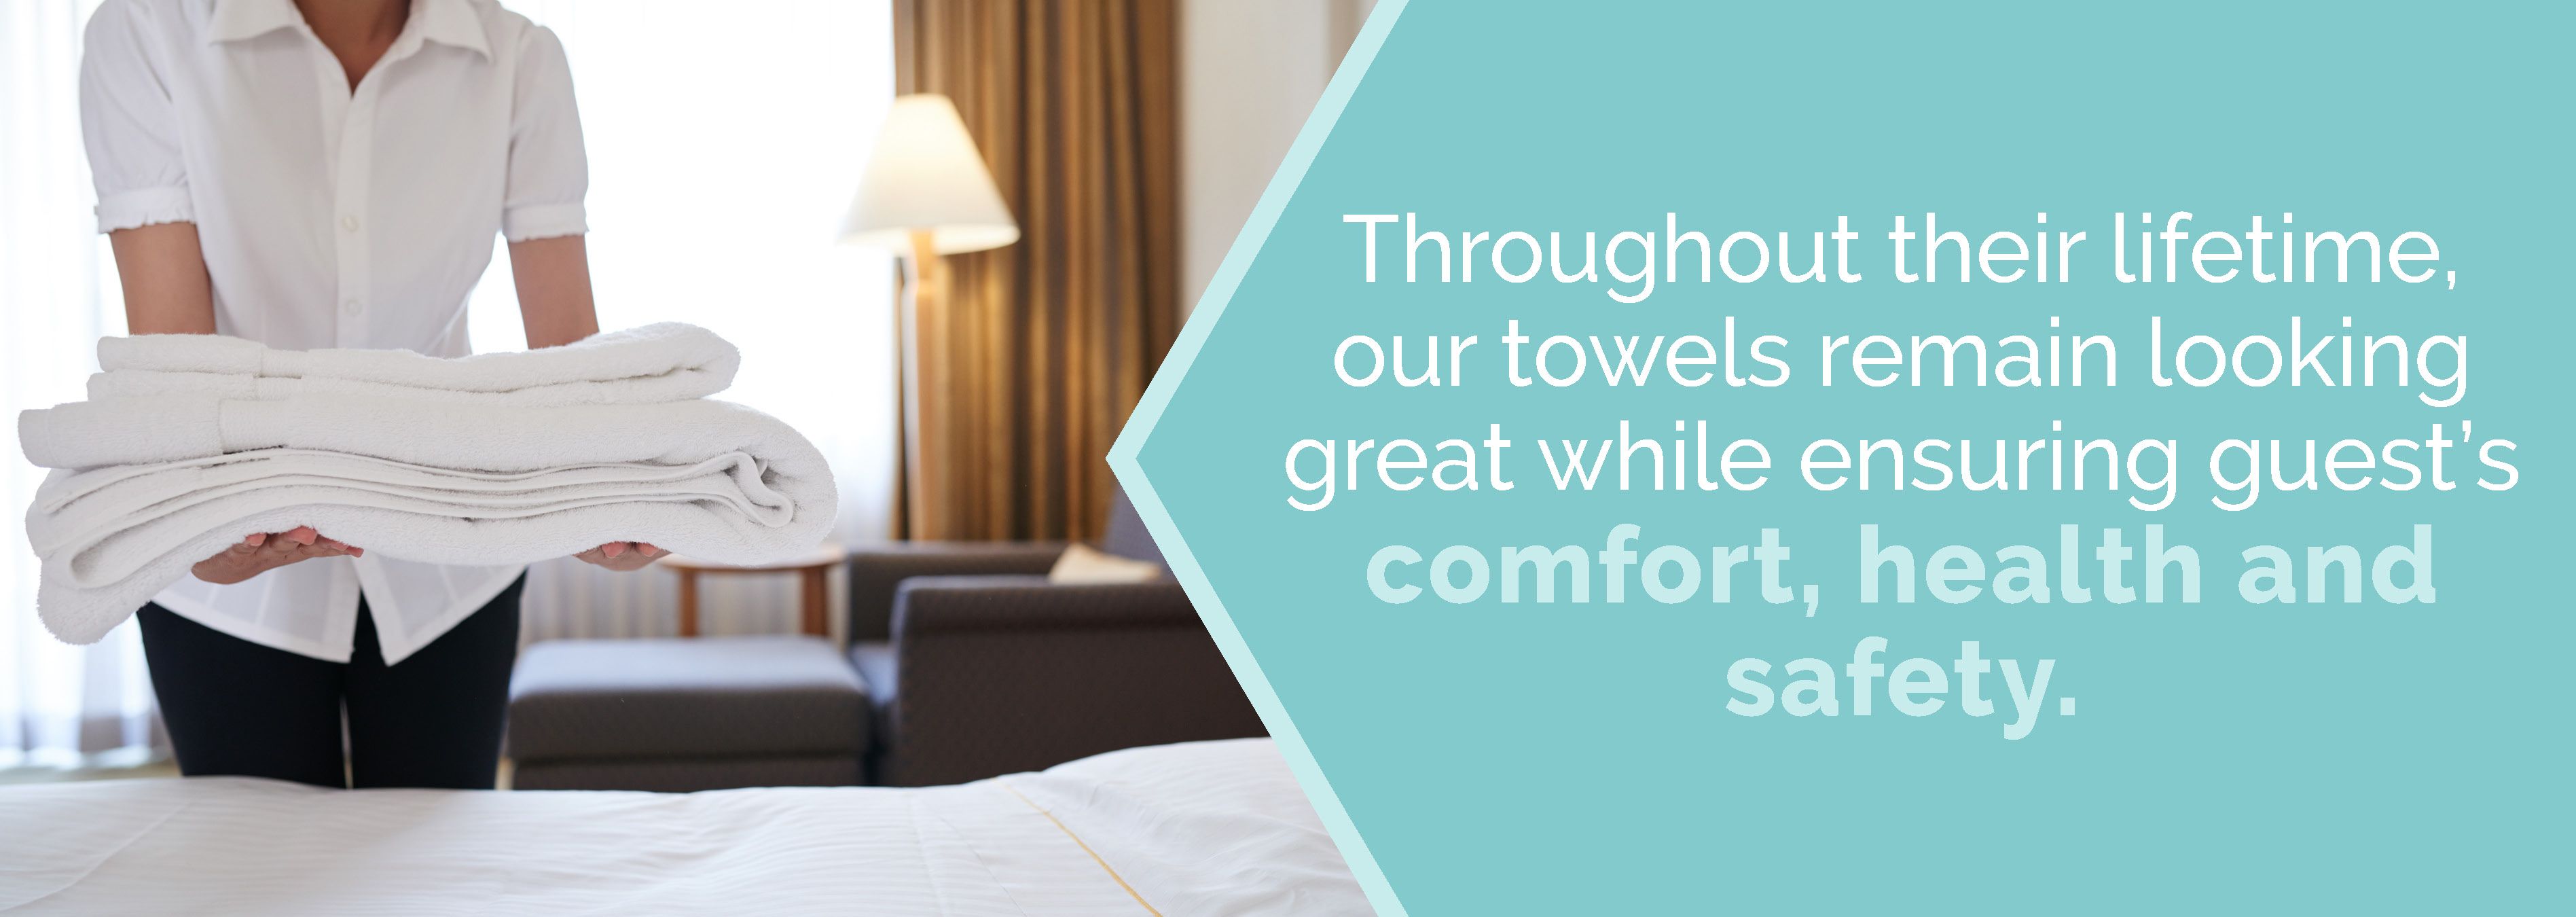 Our towels remain looking great while ensuring guest's comfort, health and safety.